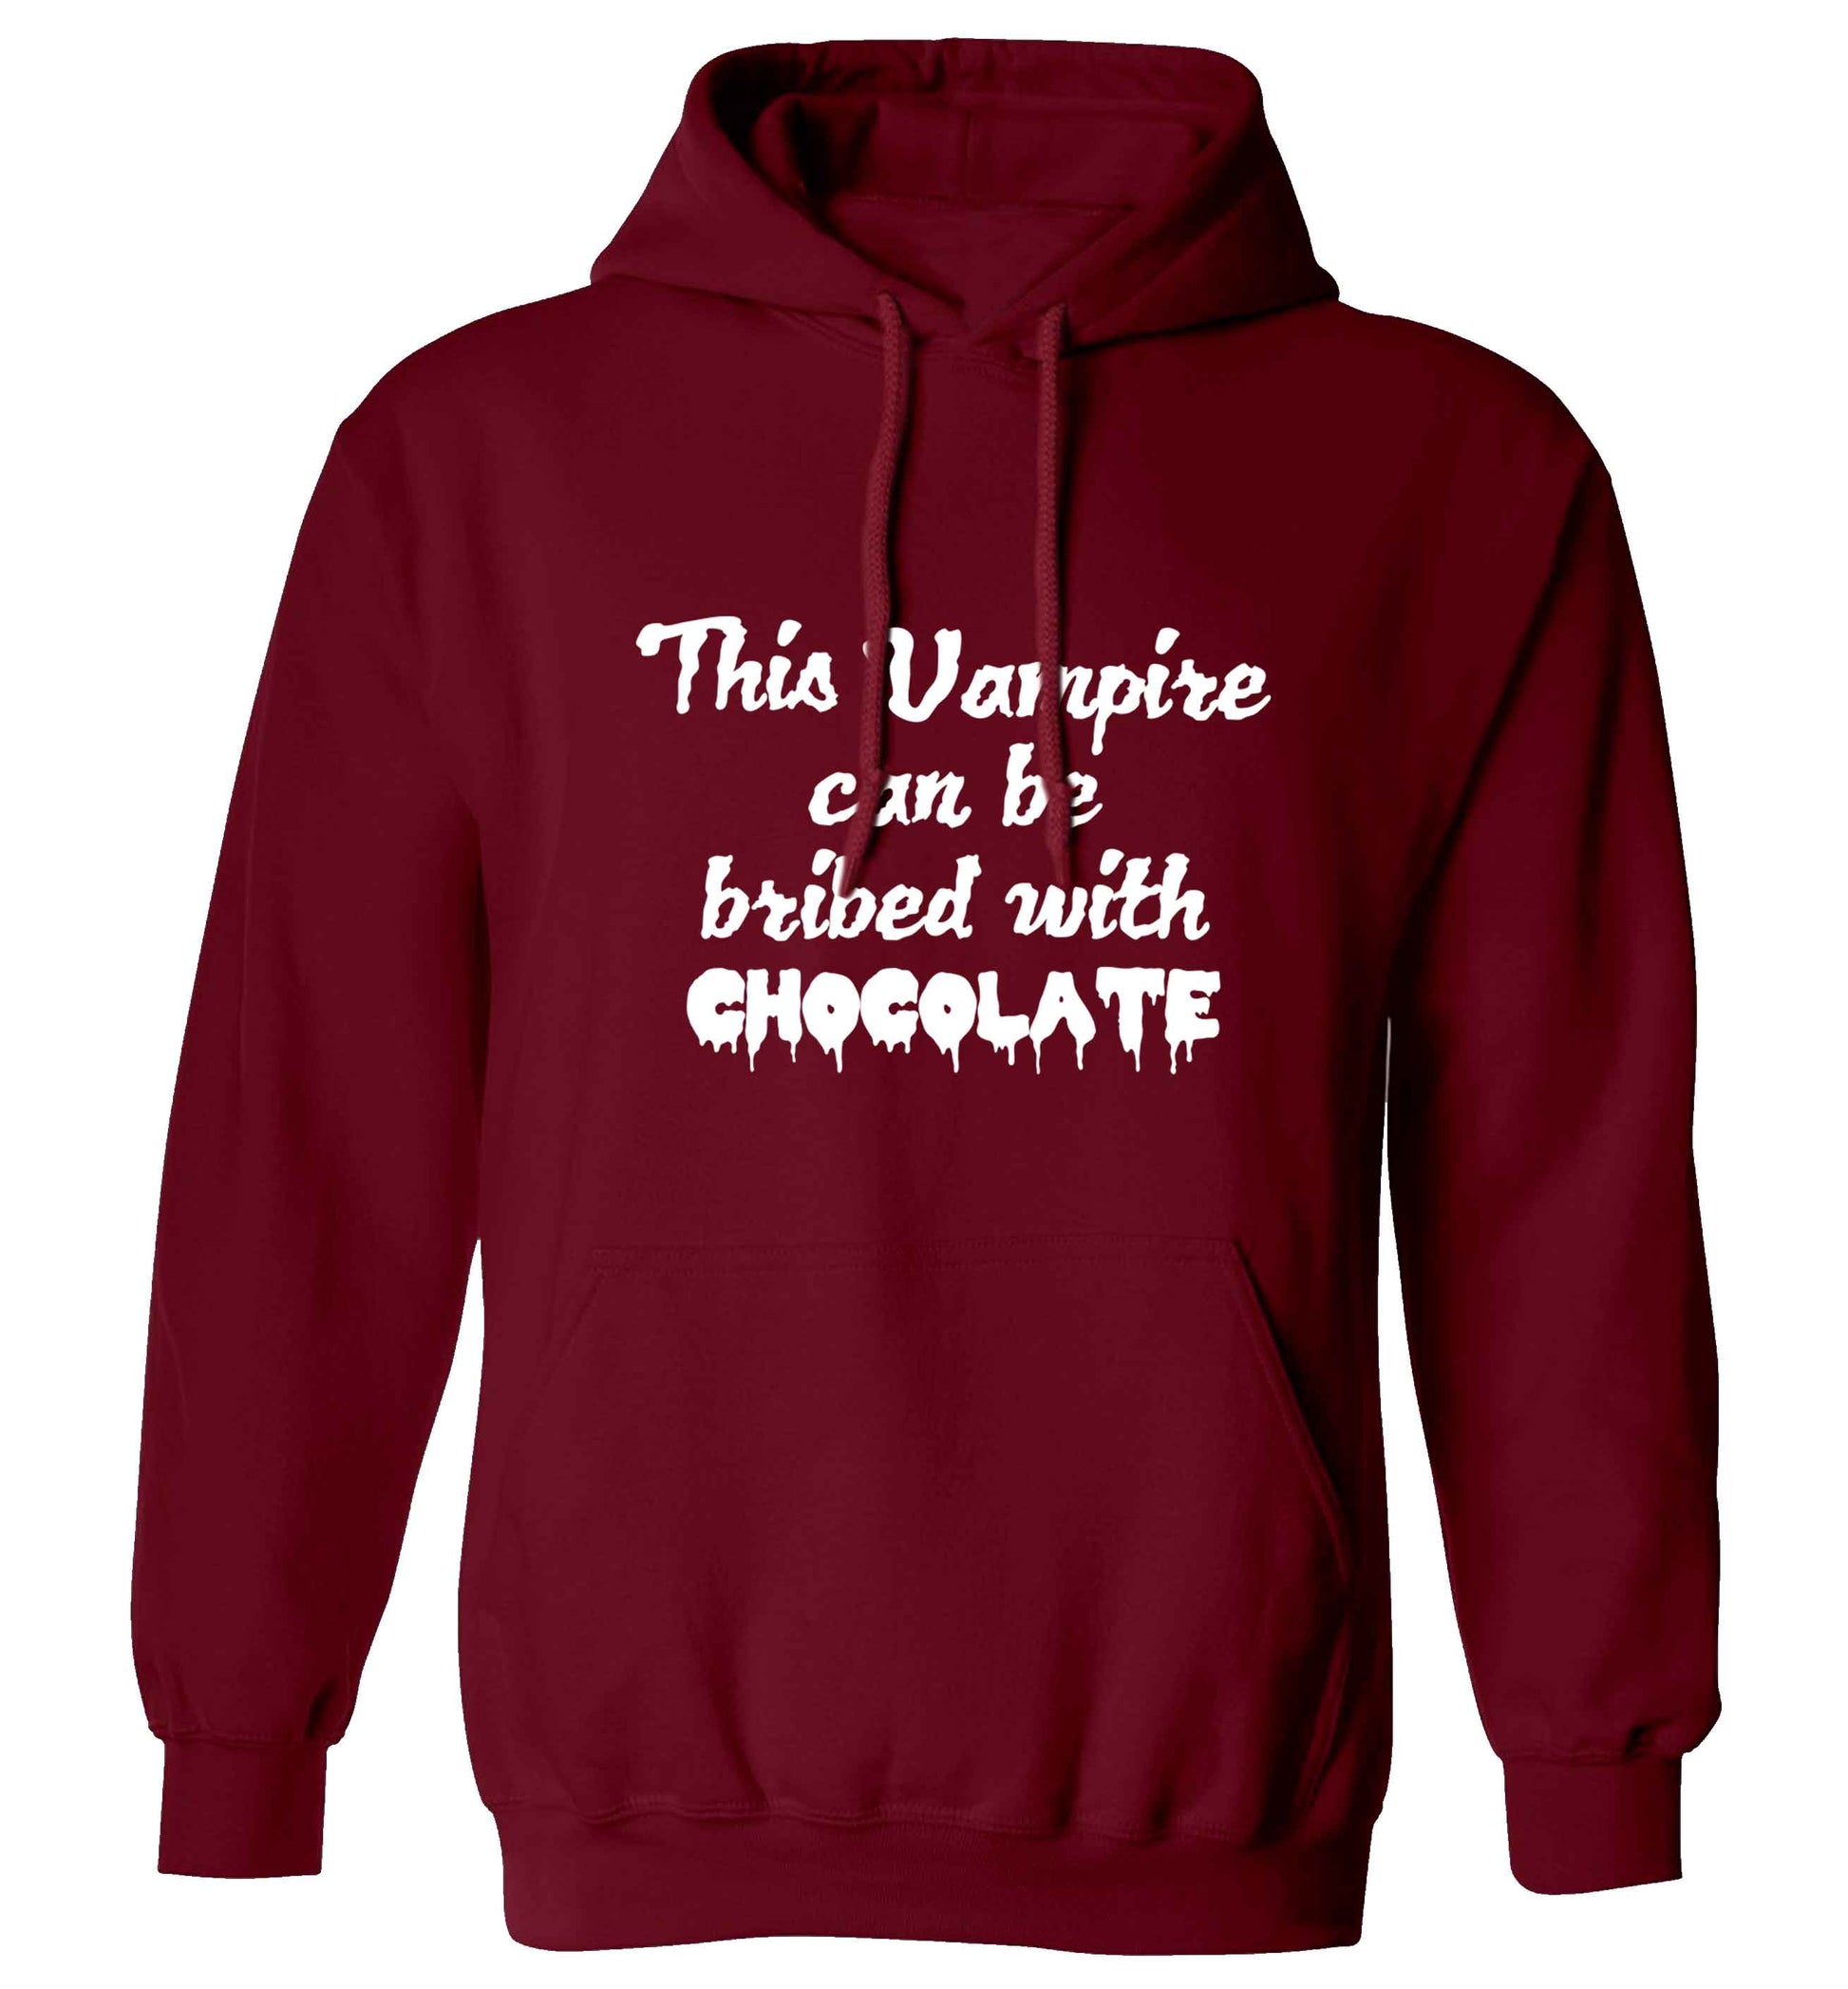 This vampire can be bribed with chocolate adults unisex maroon hoodie 2XL